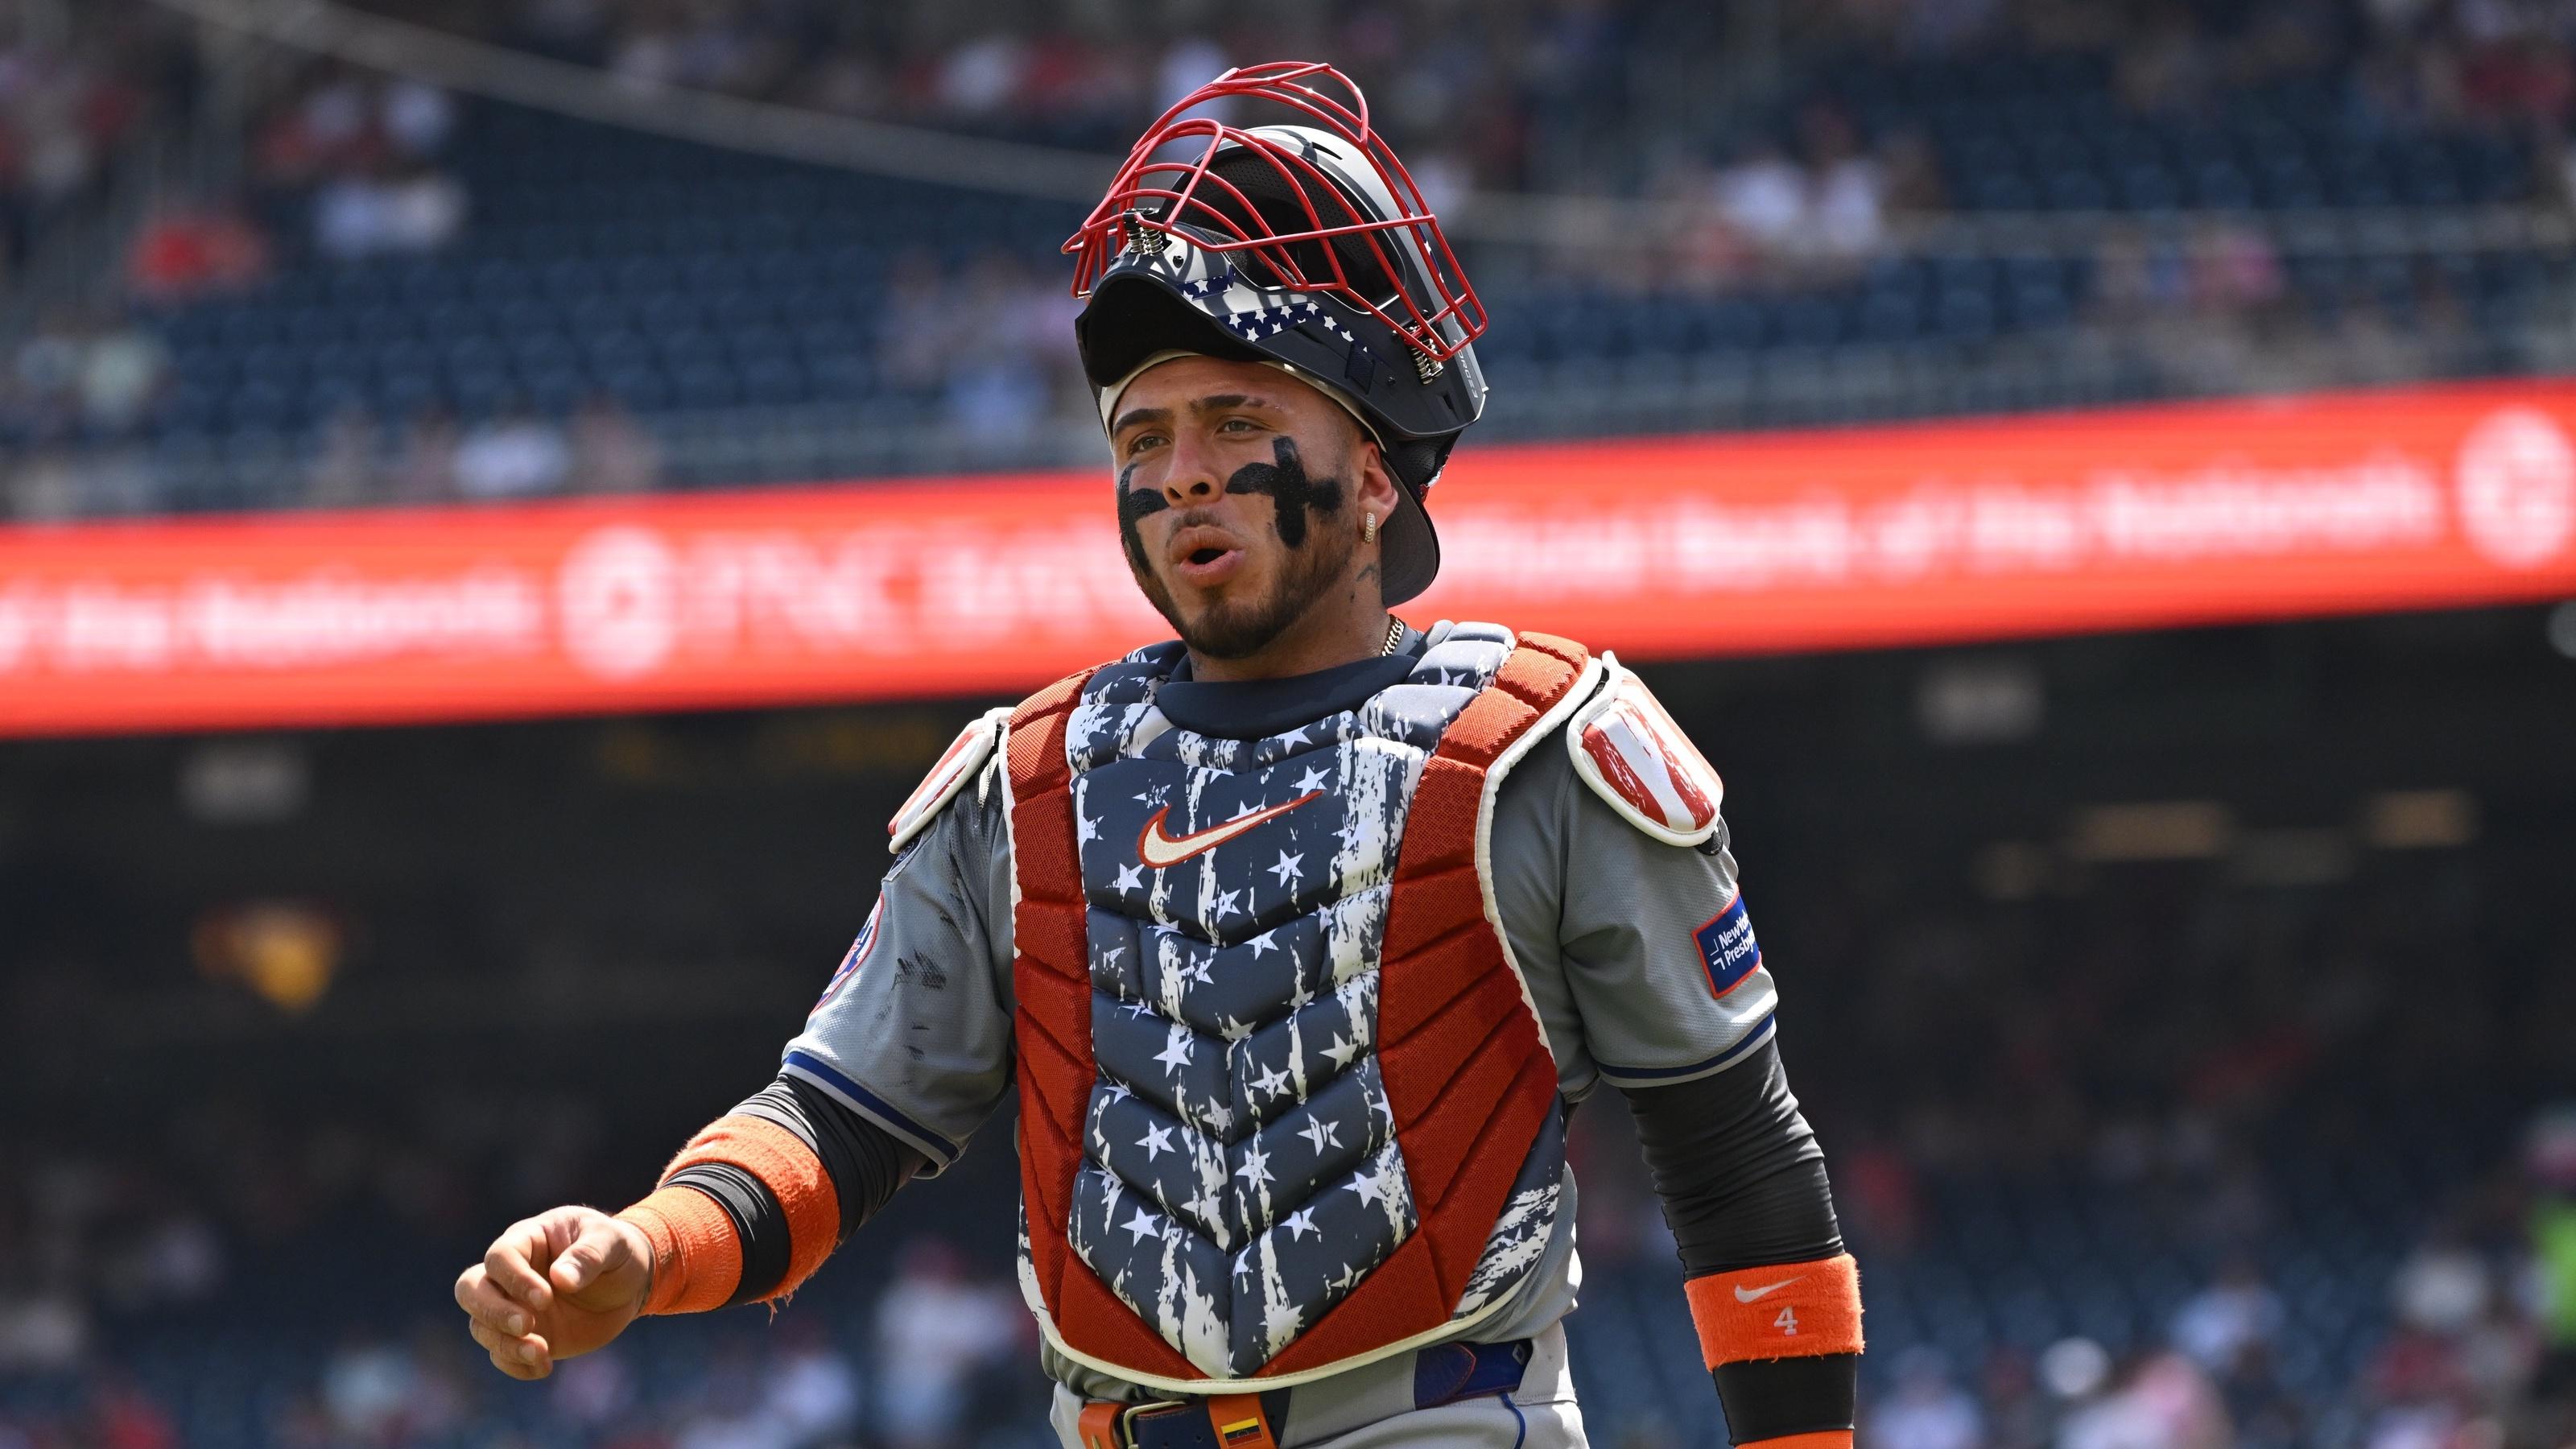 Mets get one-hit in 1-0 loss to Nationals on Fourth of July to split series